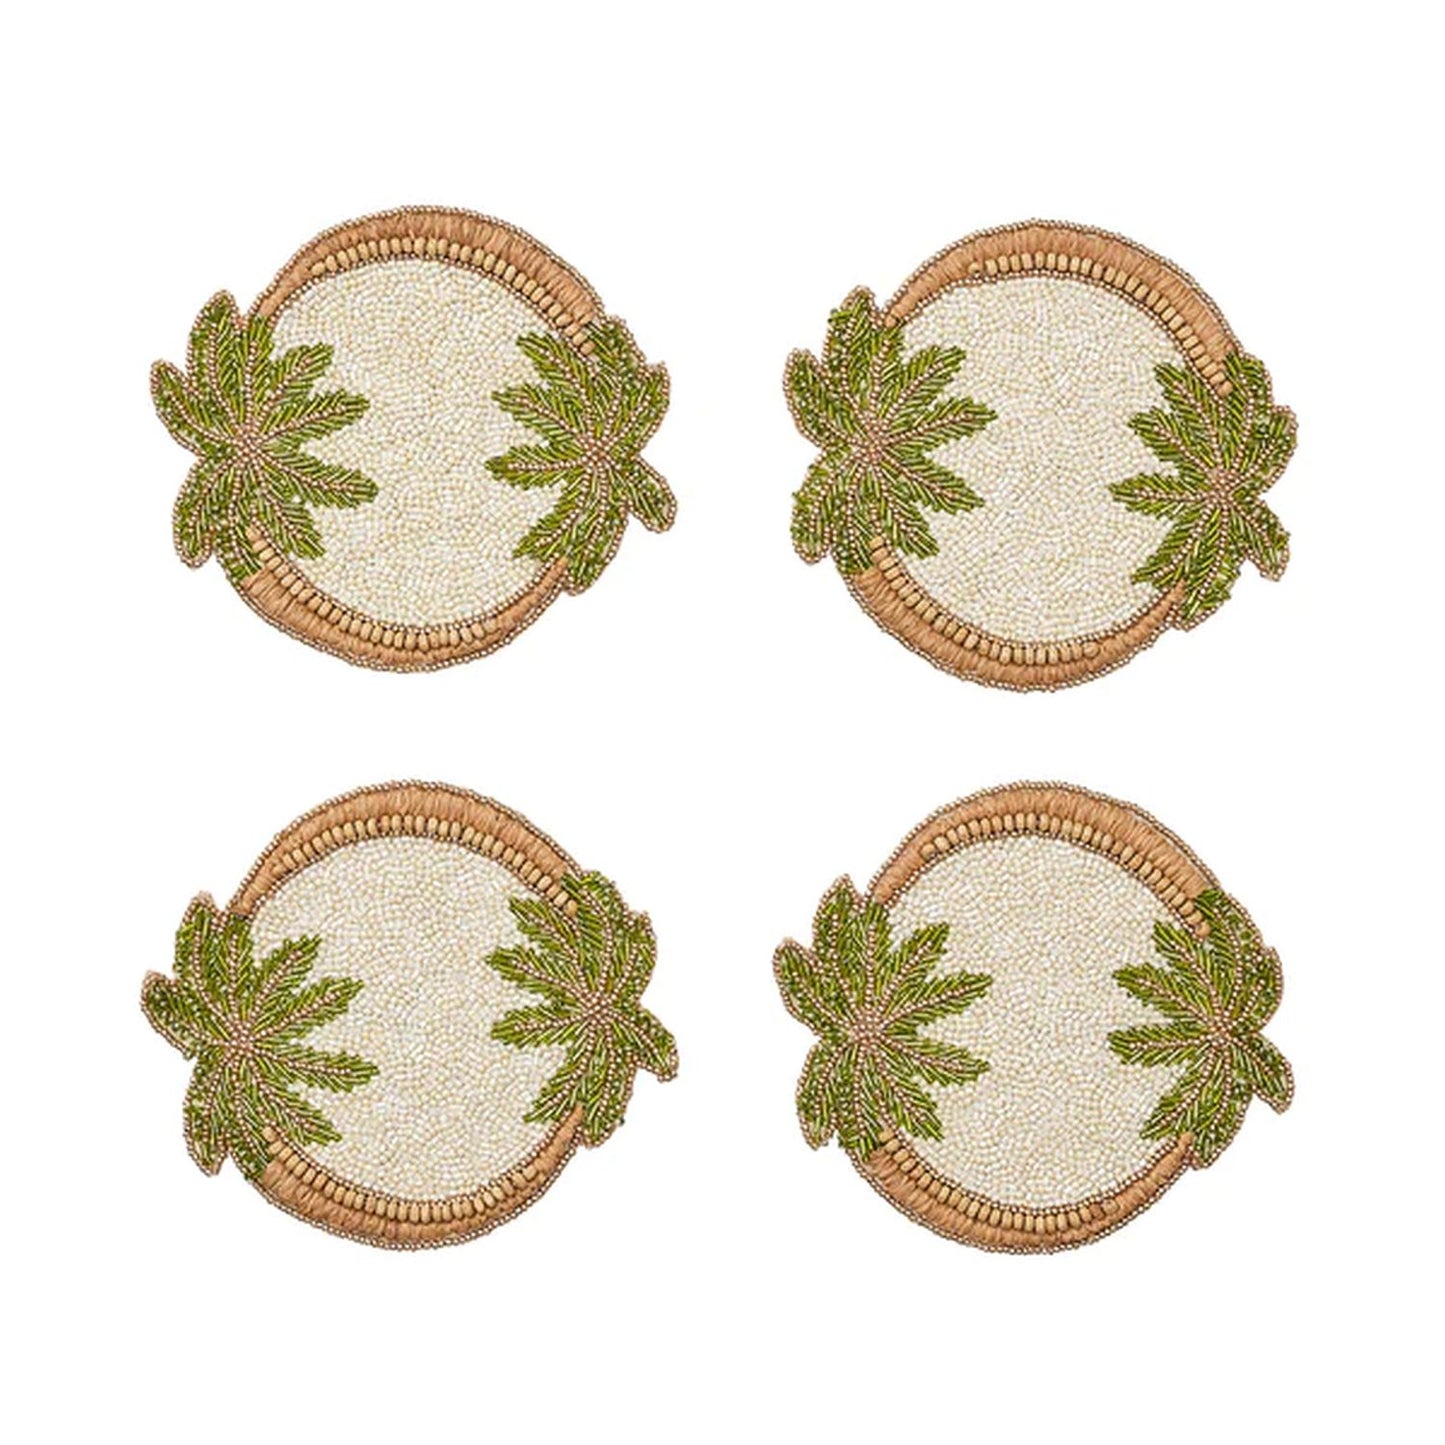 Kim Seybert Oasis Coasters in Ivory, Green & Gold, Set of 4 in a Gift Bag